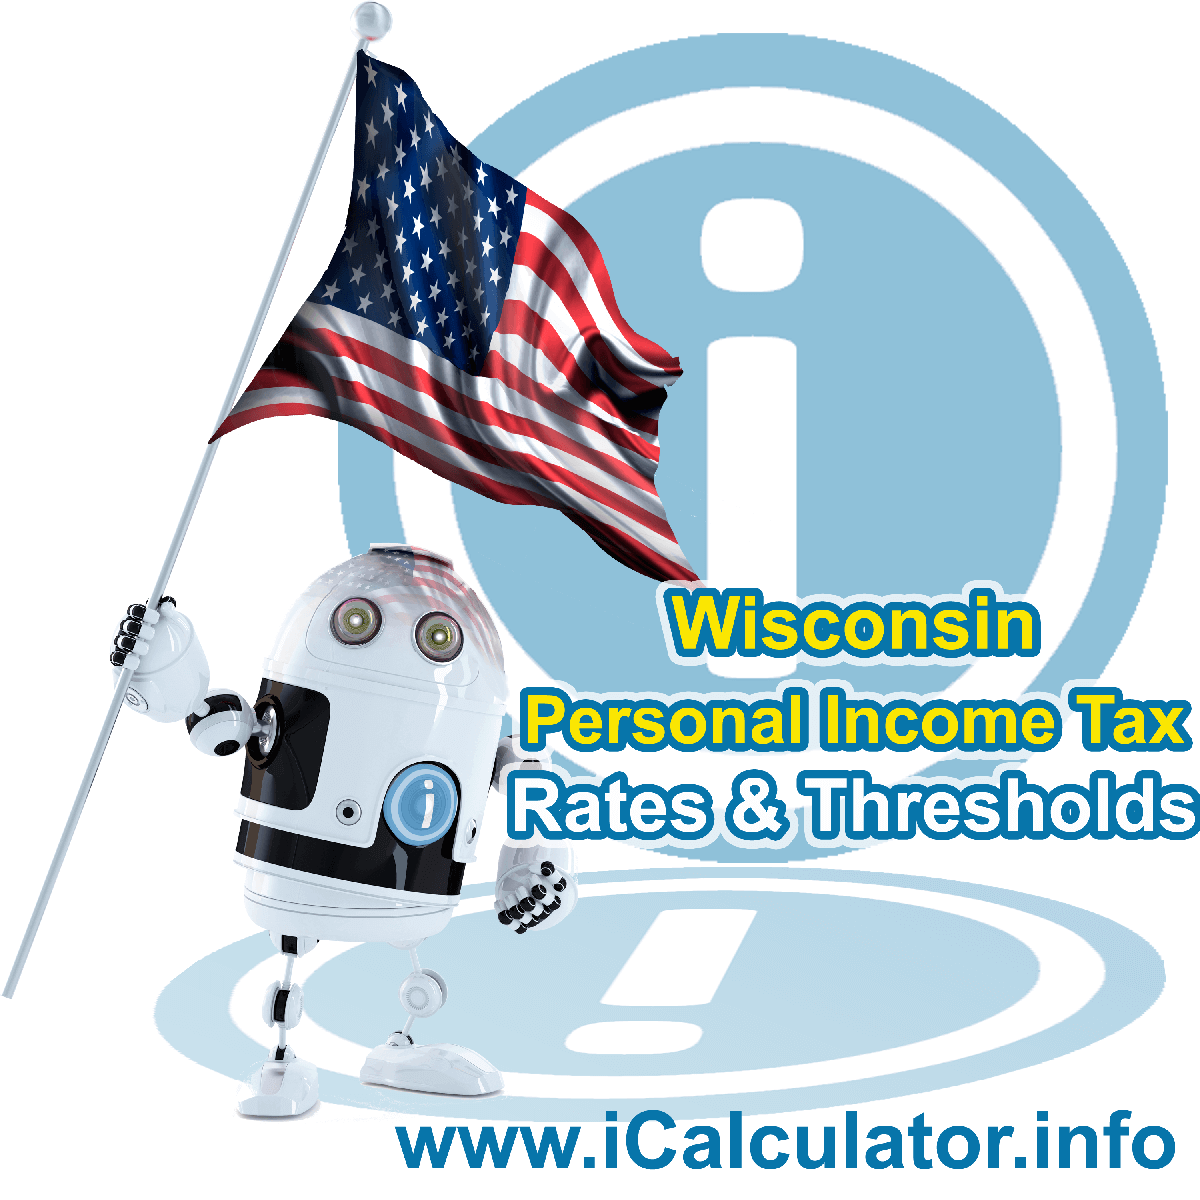 Wisconsin State Tax Tables 2020. This image displays details of the Wisconsin State Tax Tables for the 2020 tax return year which is provided in support of the 2020 US Tax Calculator